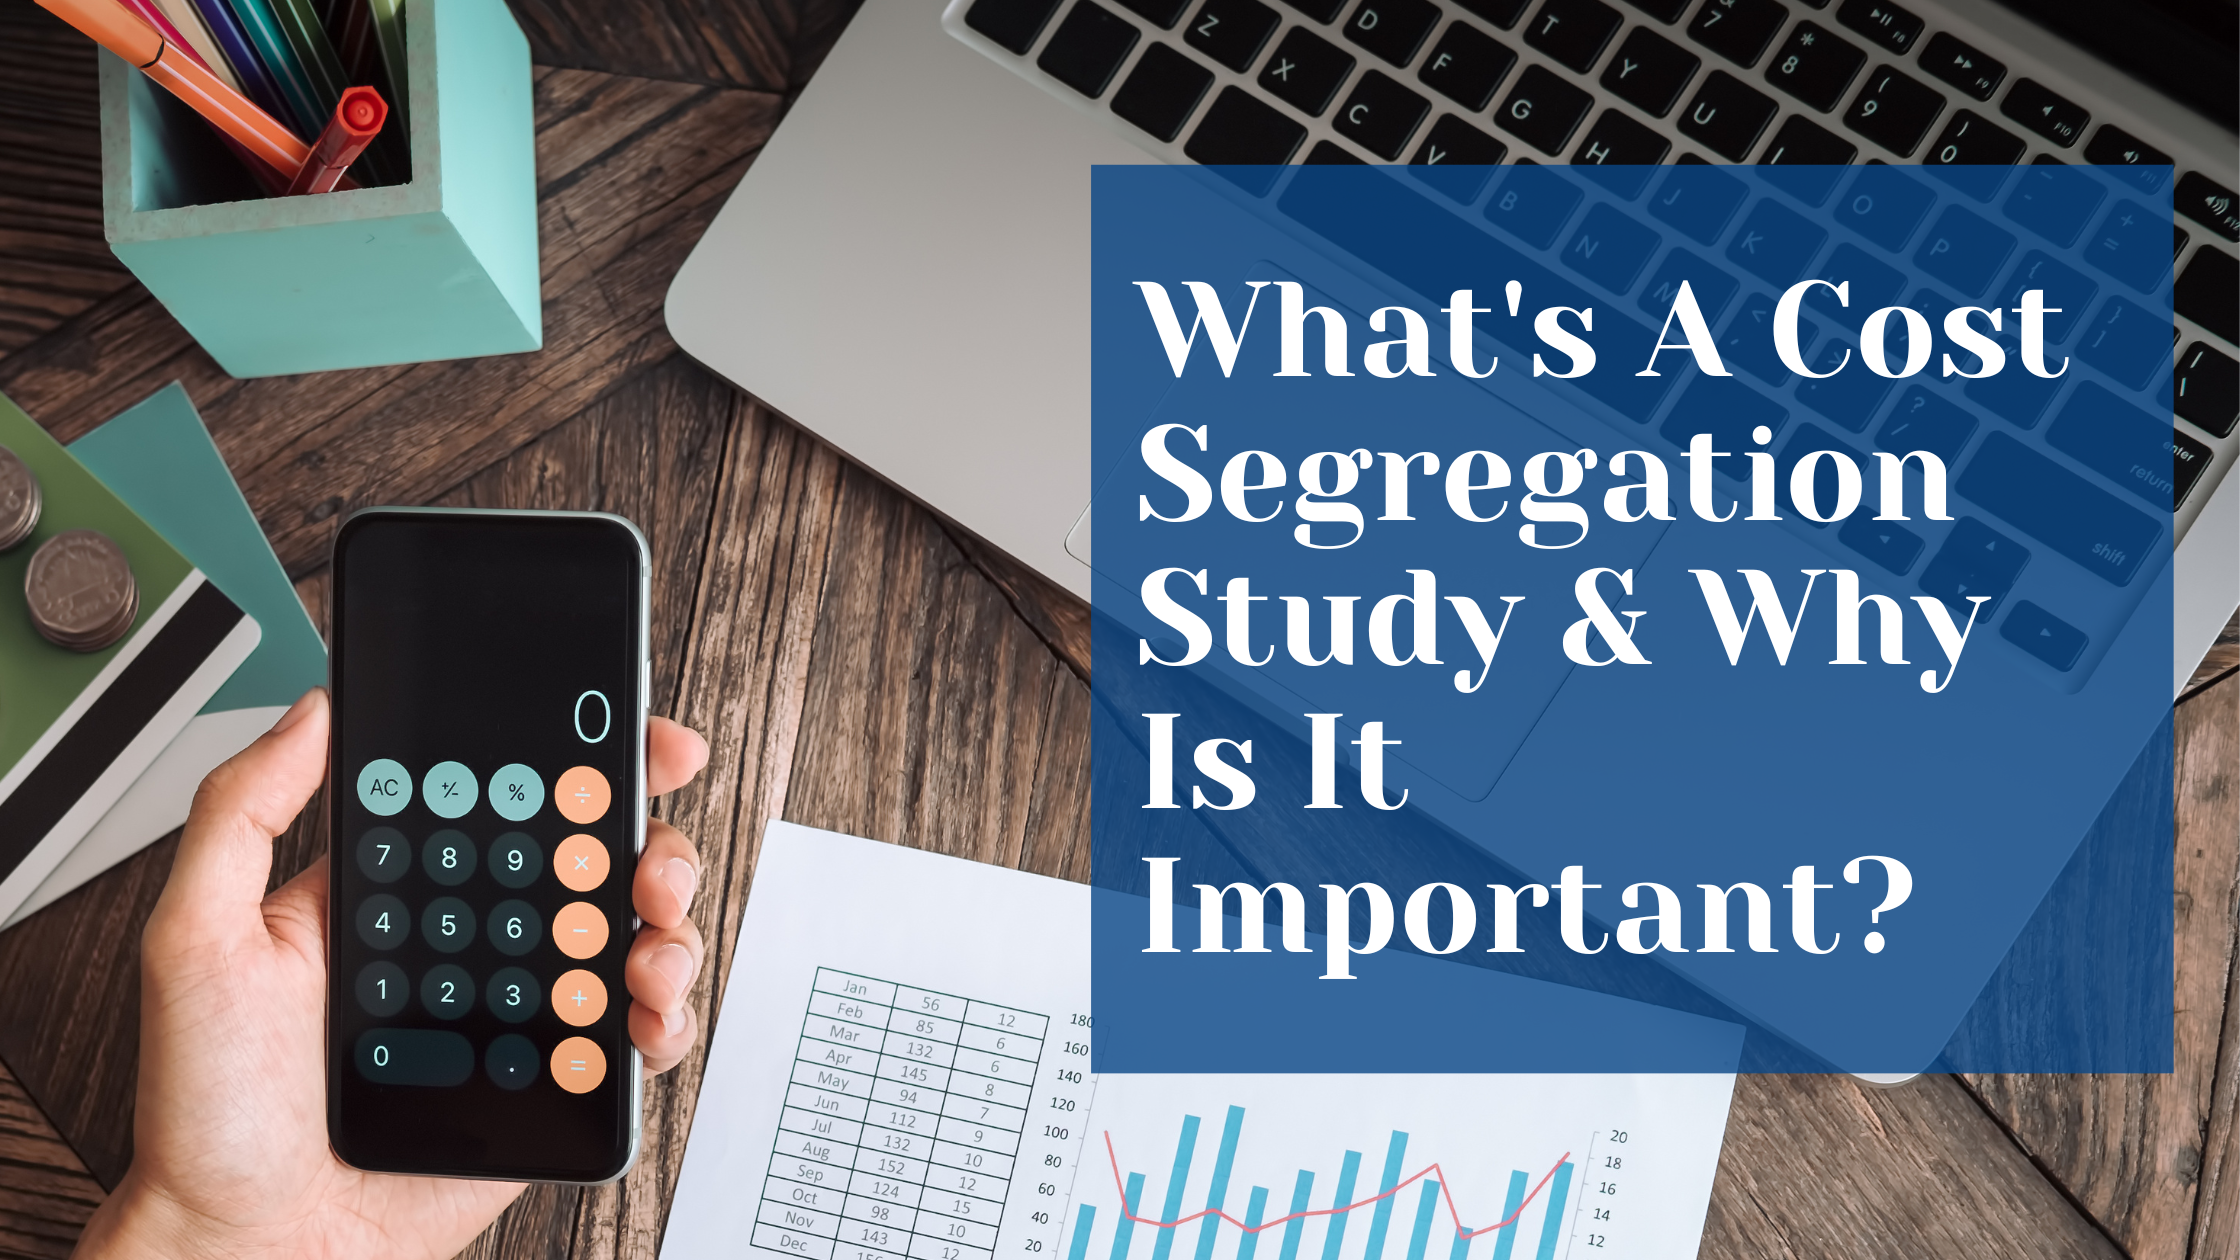 What's A Cost Segregation Study & Why Is It Important?